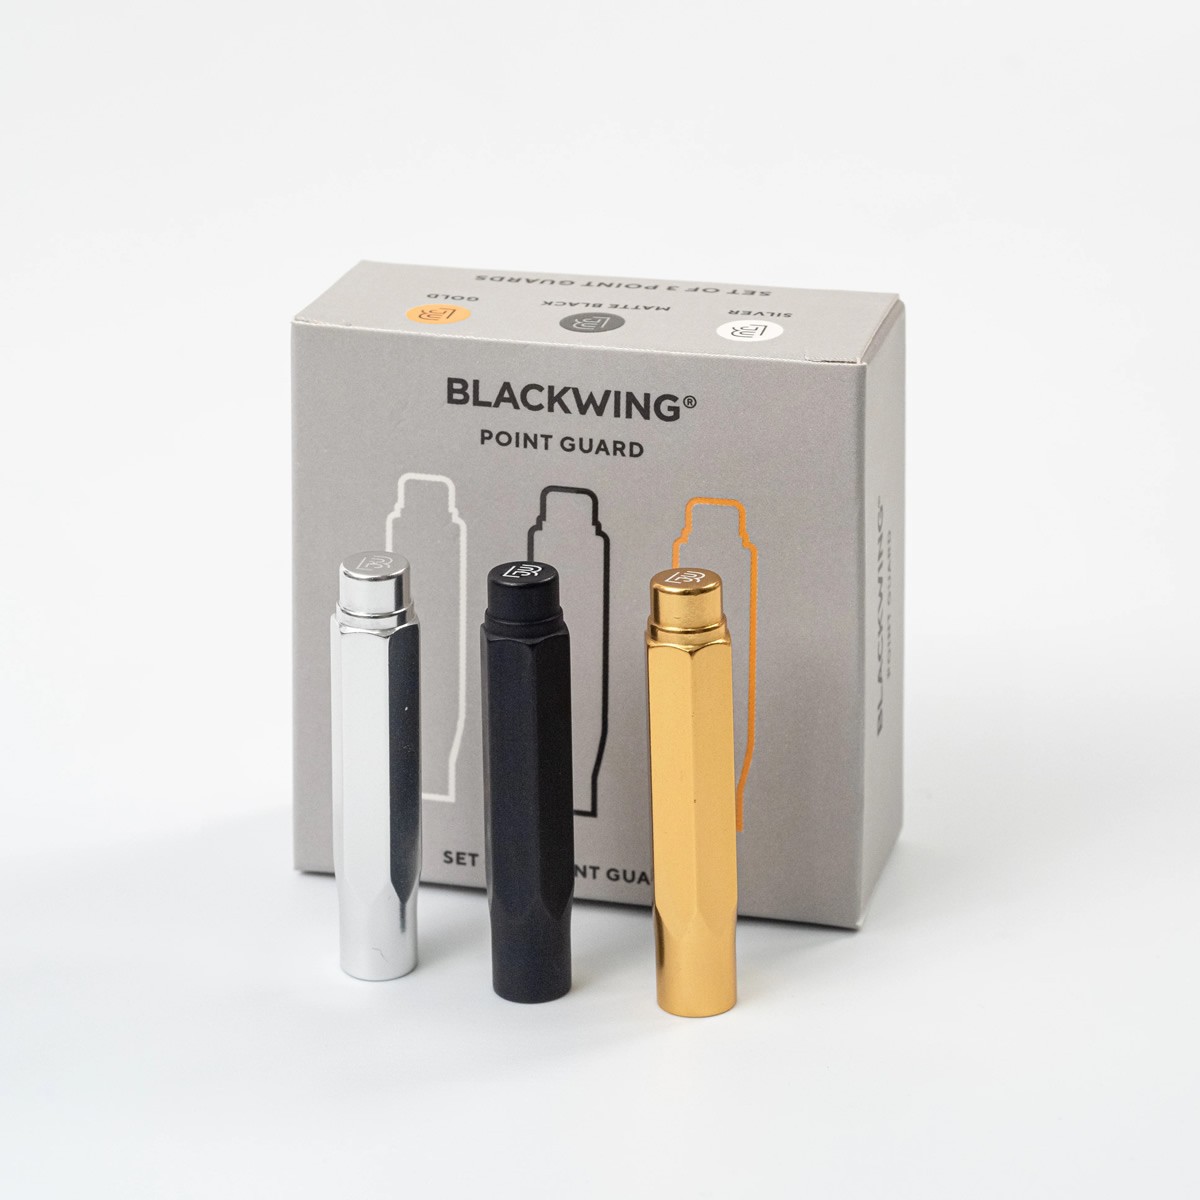 BLACKWING® Point Guard Προστατευτικά Καπάκια Μύτης 3 pack